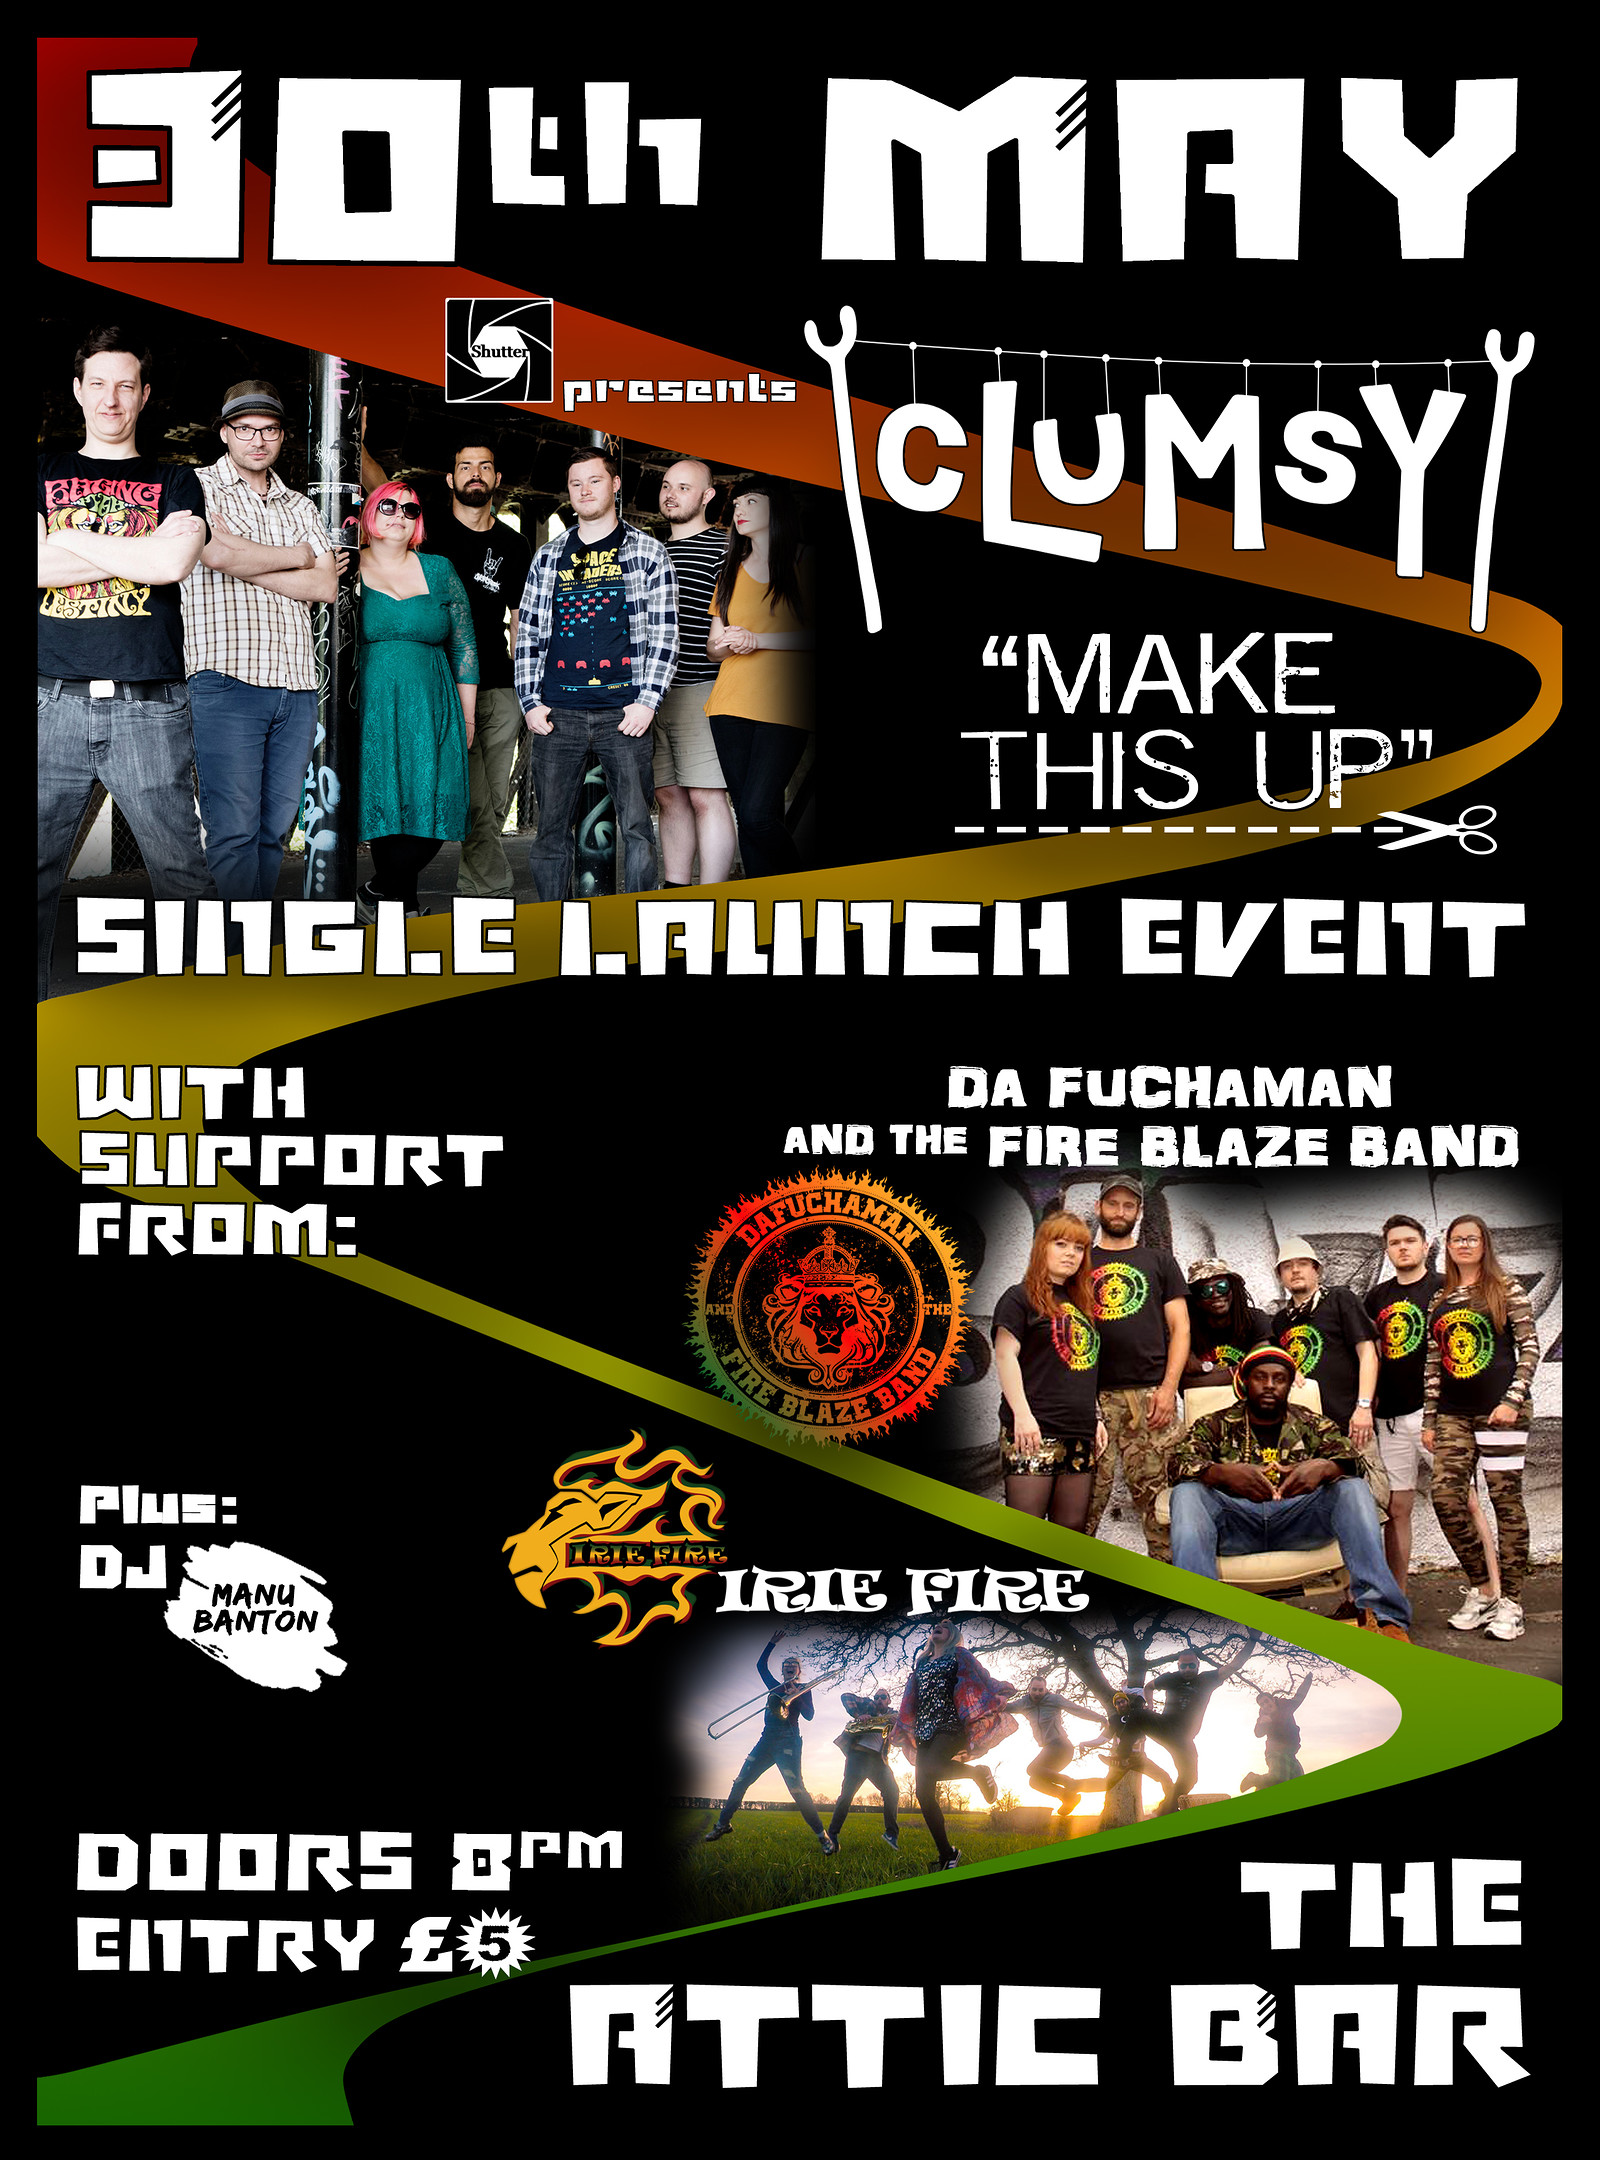 cLuMsY "Make This Up" Single Launch Event at The Attic Bar